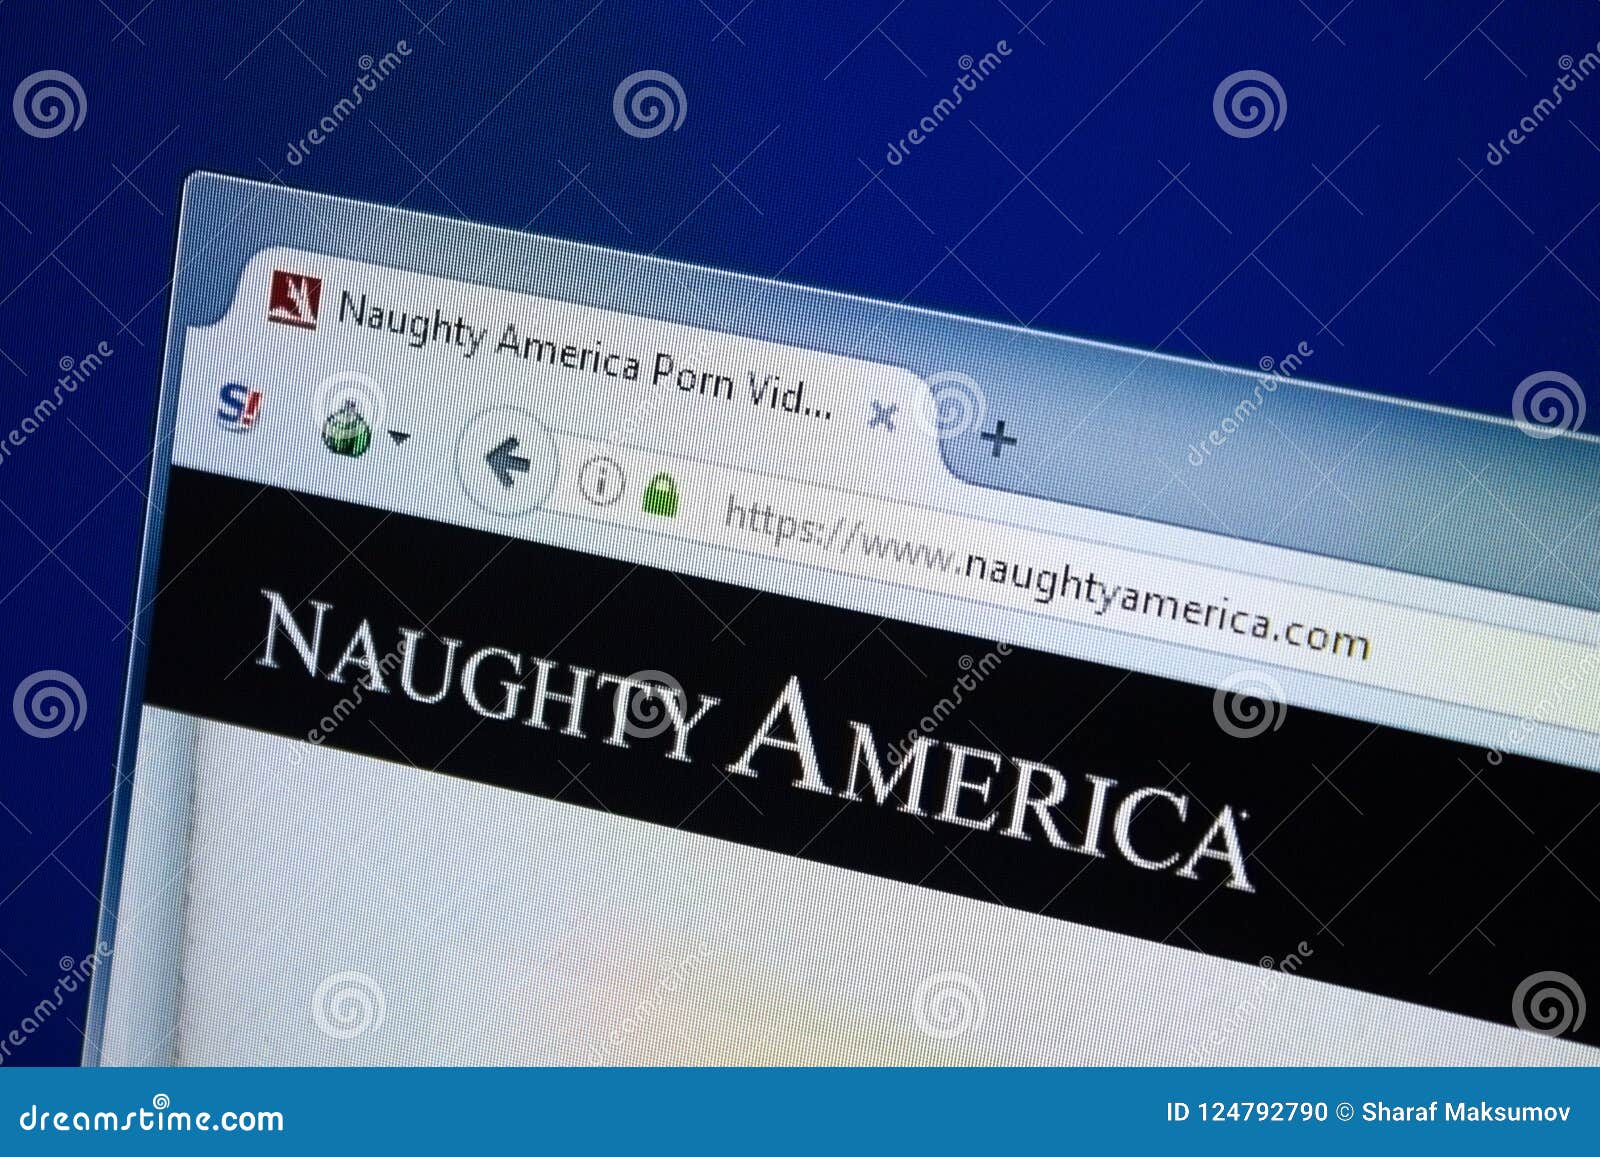 Naughty American Download